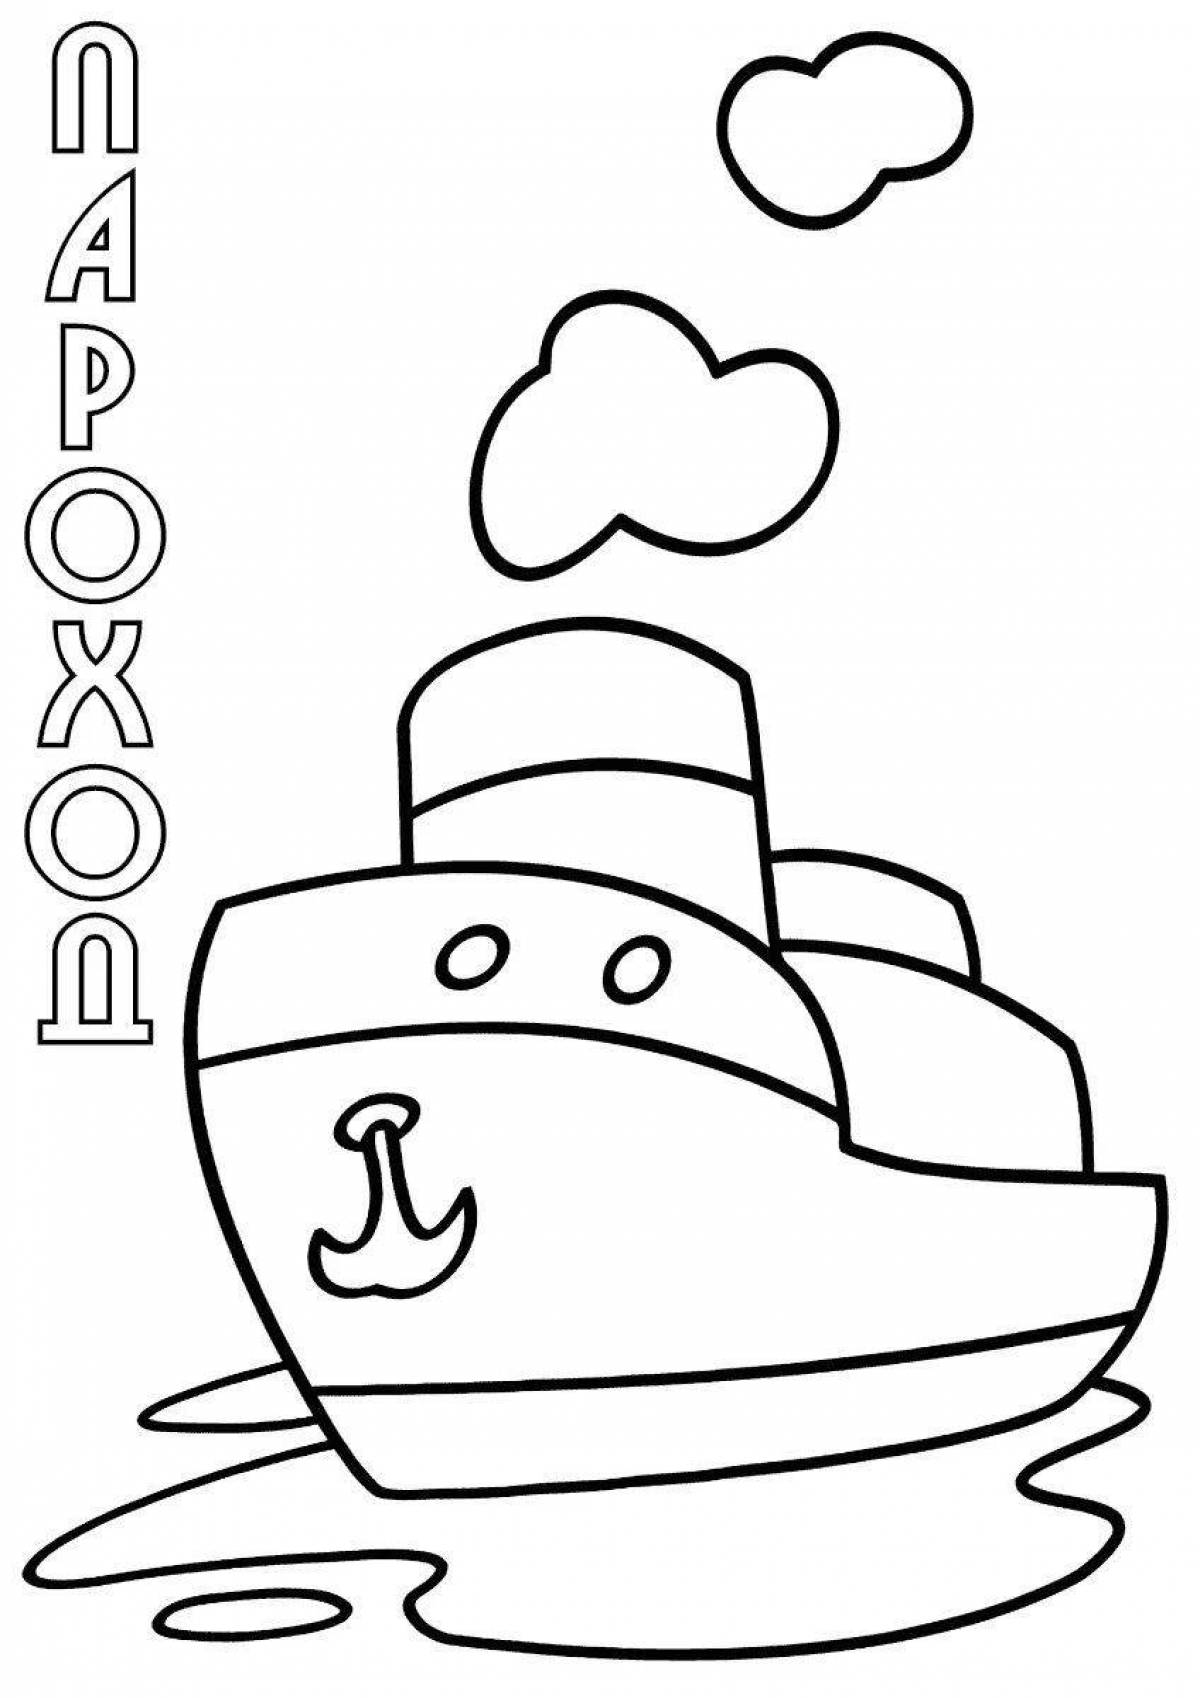 Steamboat fun coloring for kids